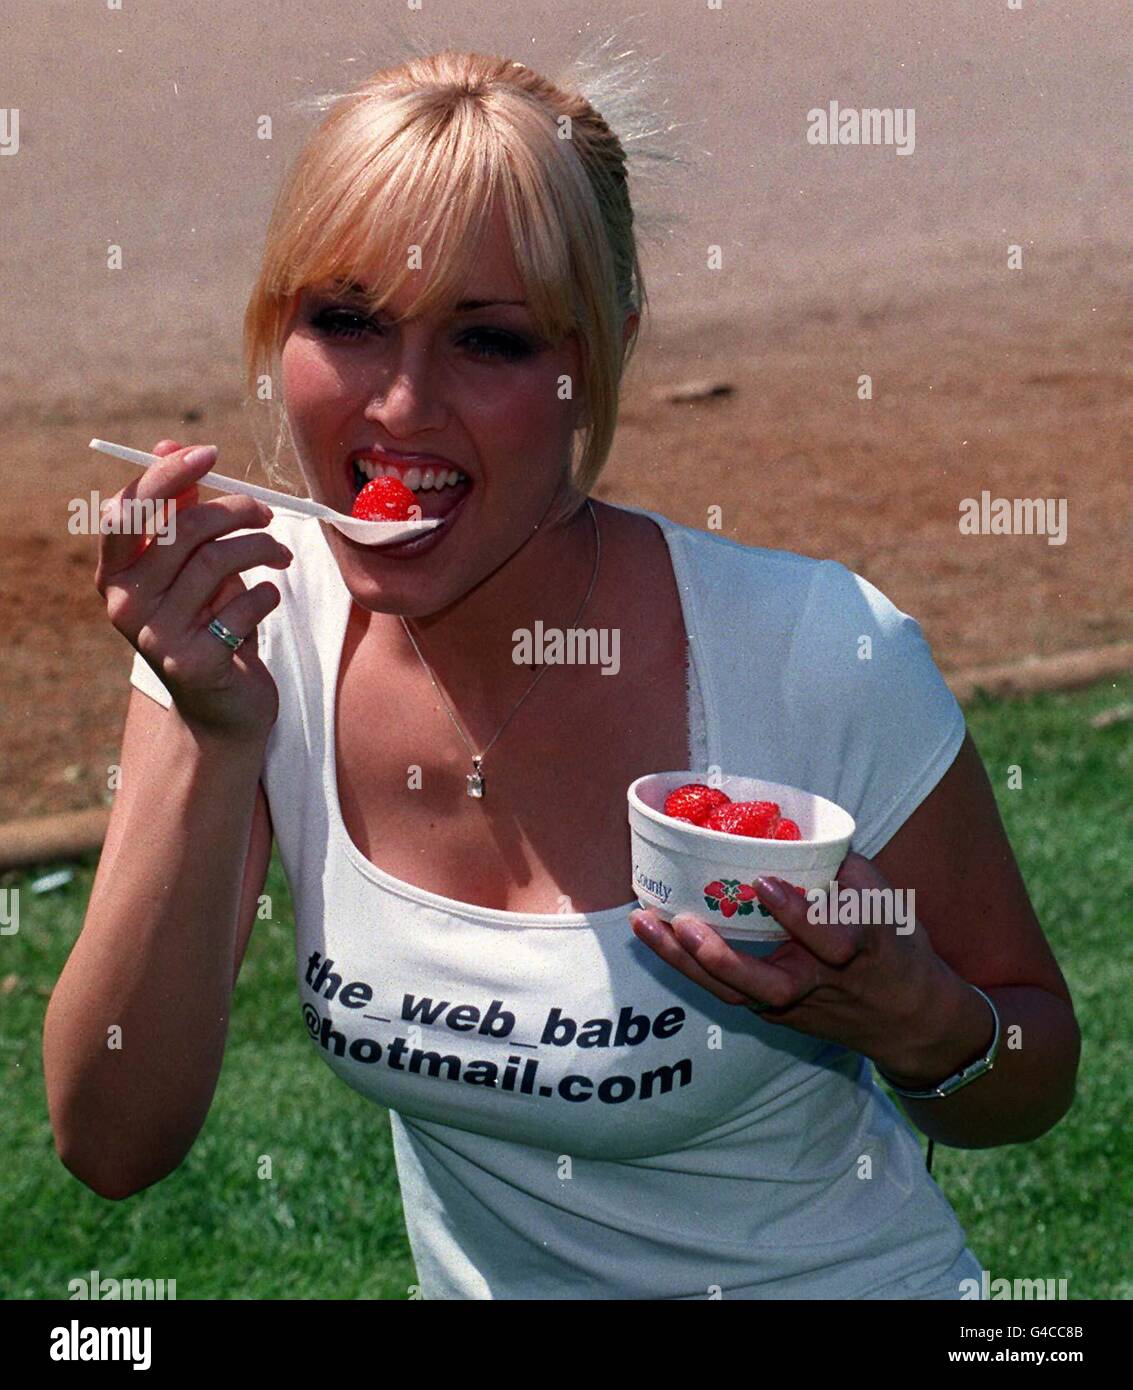 Model Emma Noble samples the strawberries during her visit to the Wimbledon Tennis Championships today (Wednesday) where she was promoting her feature on computer giant Microsoft's website. Fans of Ms Noble can gain an insight into her daily routine via 'Watch a day in the life of Emma Noble' at http://msn.co.uk' Photo by Michael Stephens/PA. Stock Photo